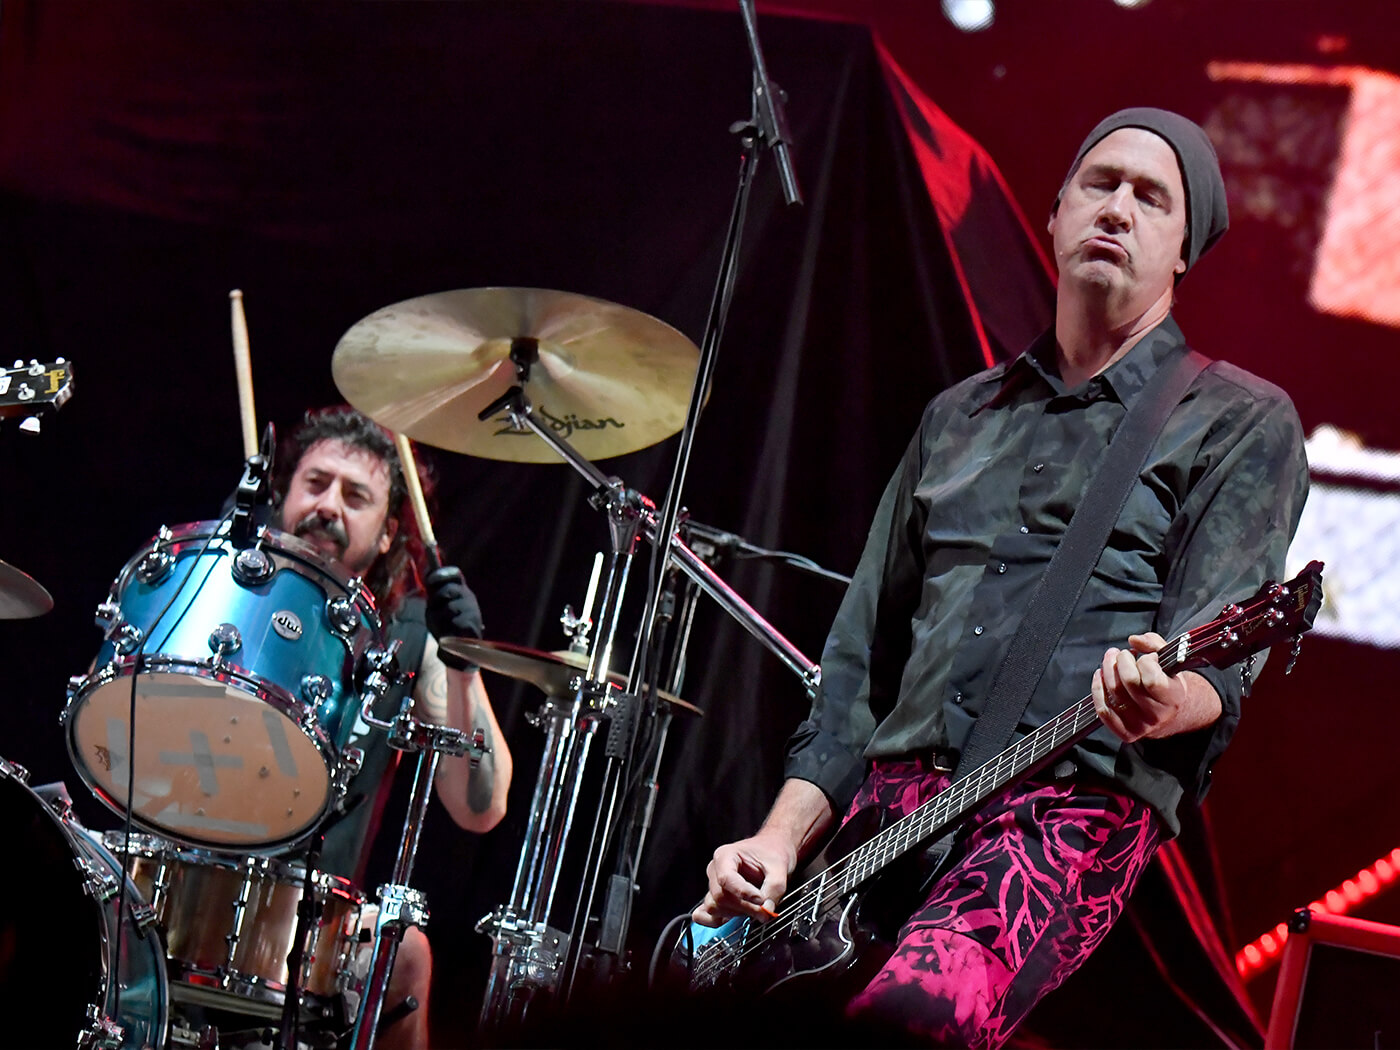 Dave Grohl and Krist Novoselic onstge